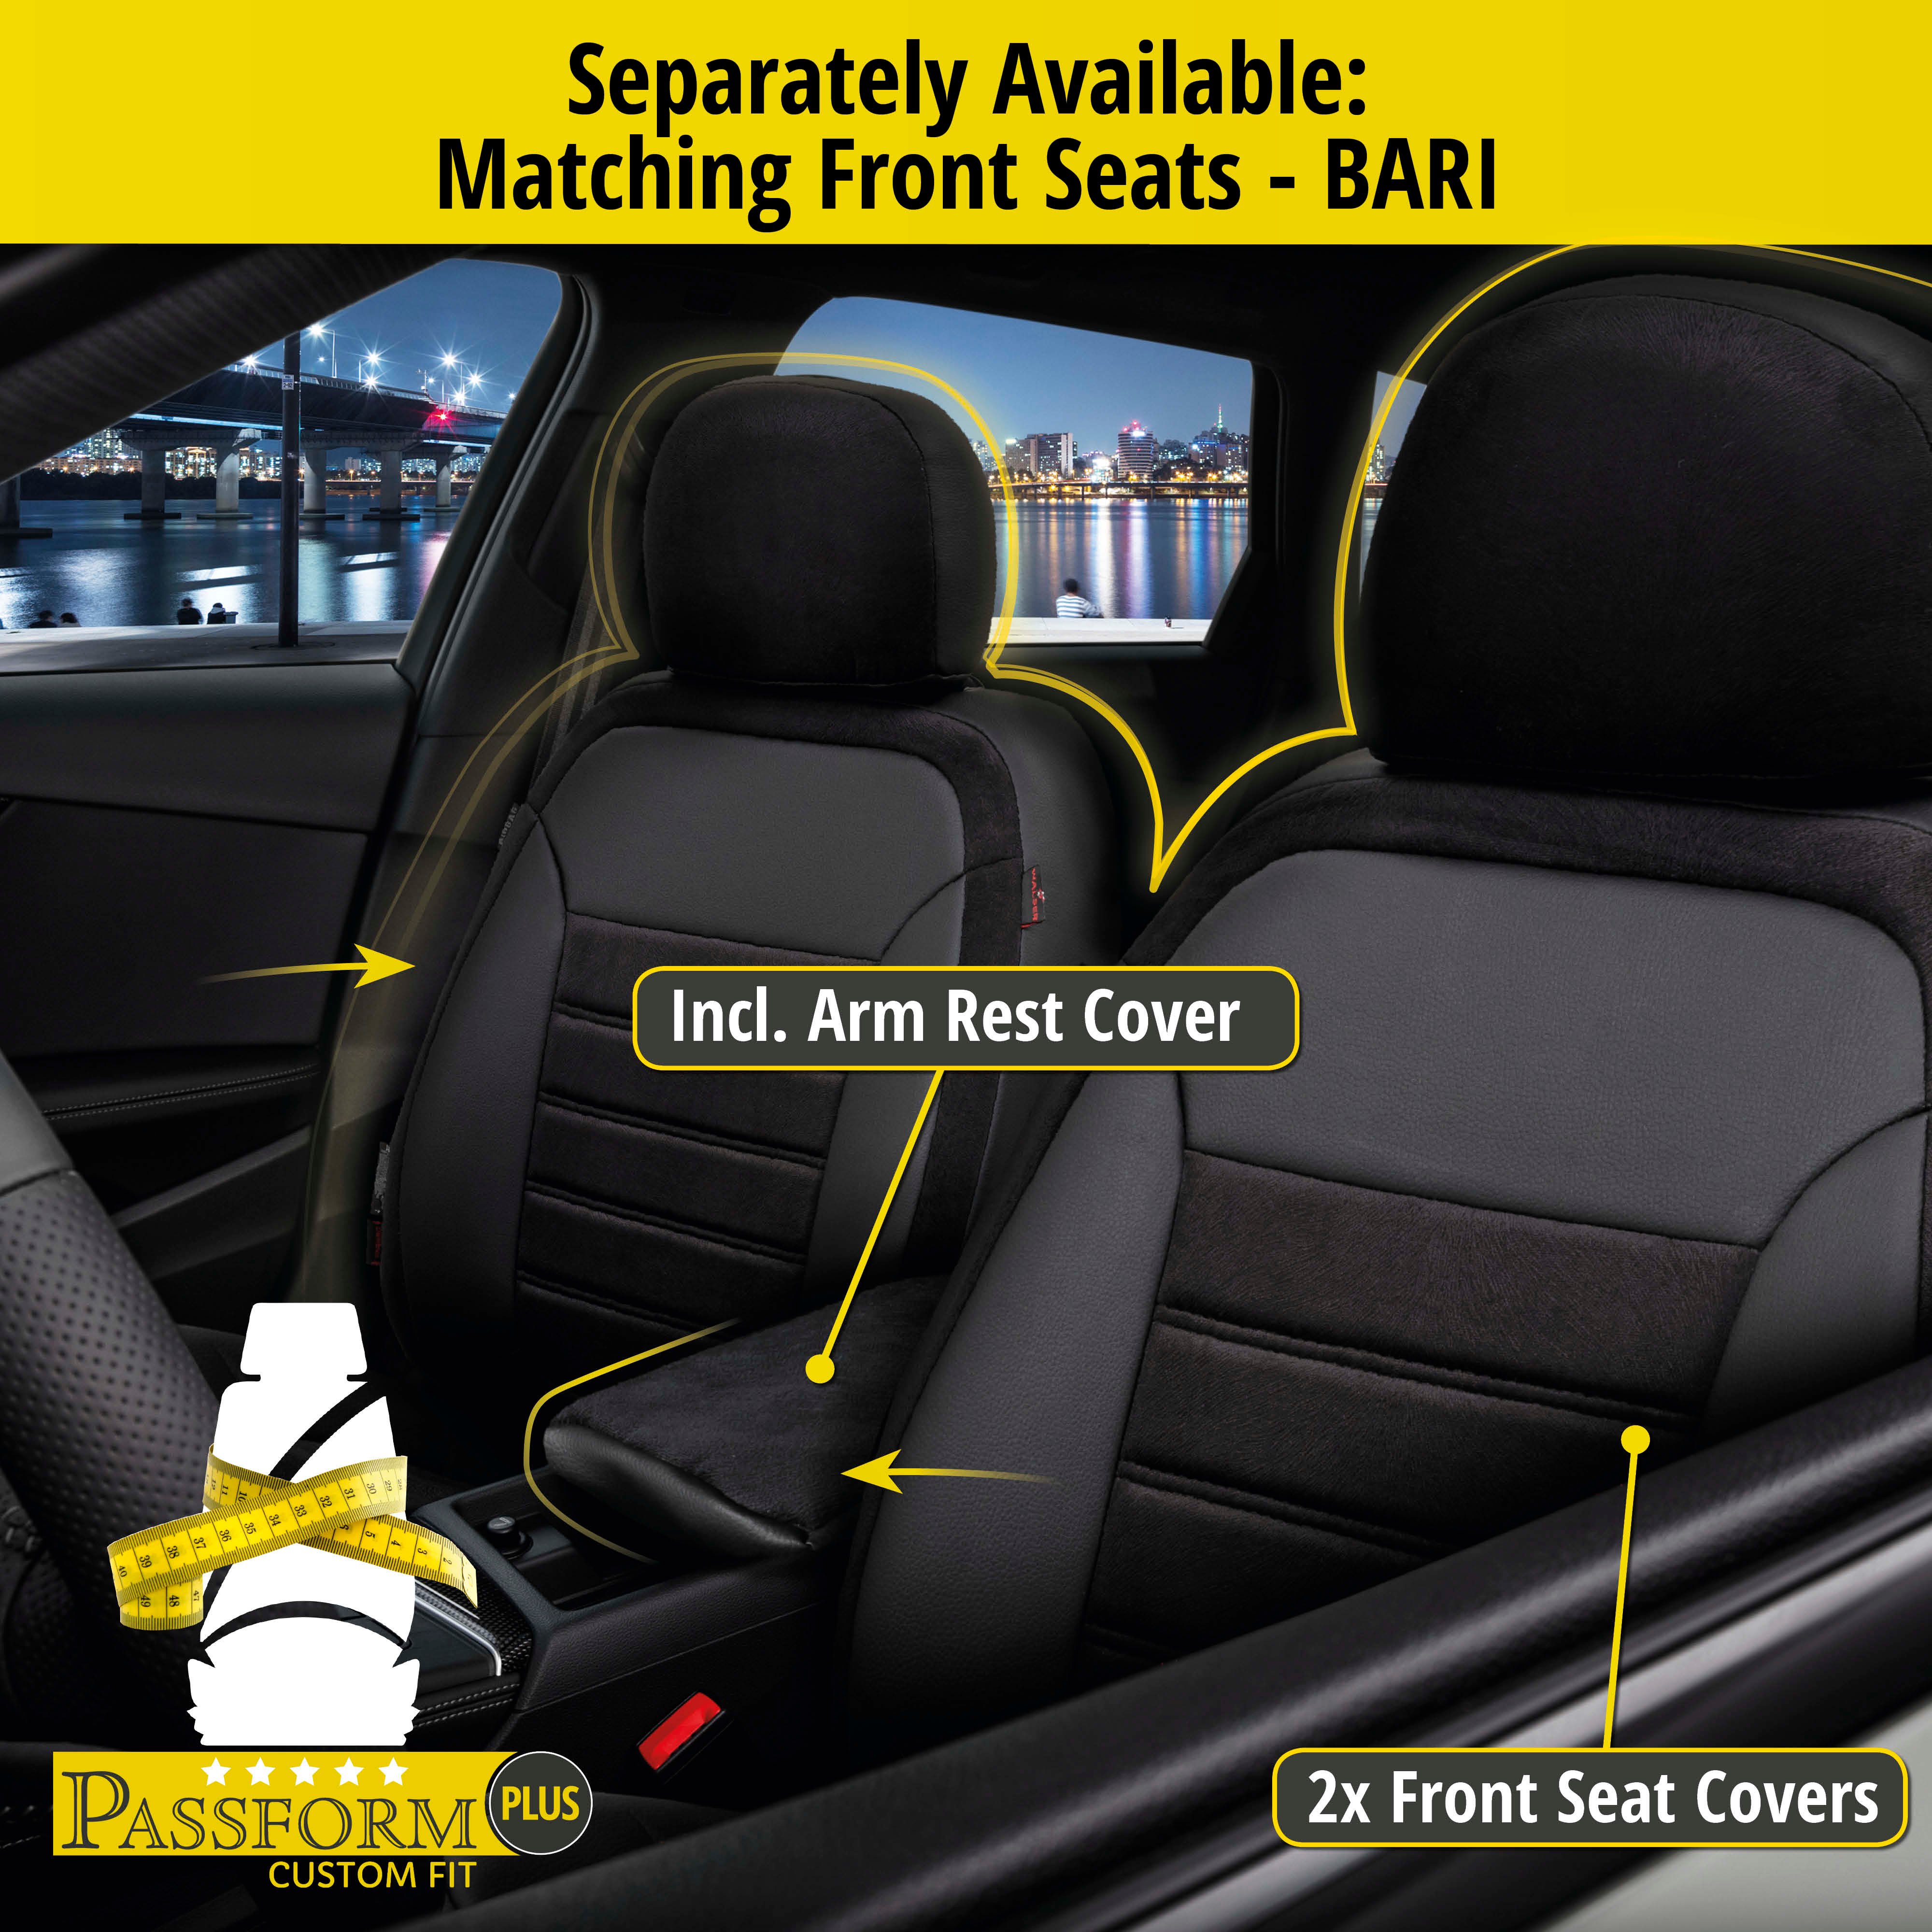 Seat Cover Bari for Fiat Panda/Panda Classic 09/2003-Today, 1 rear seat cover for normal seats